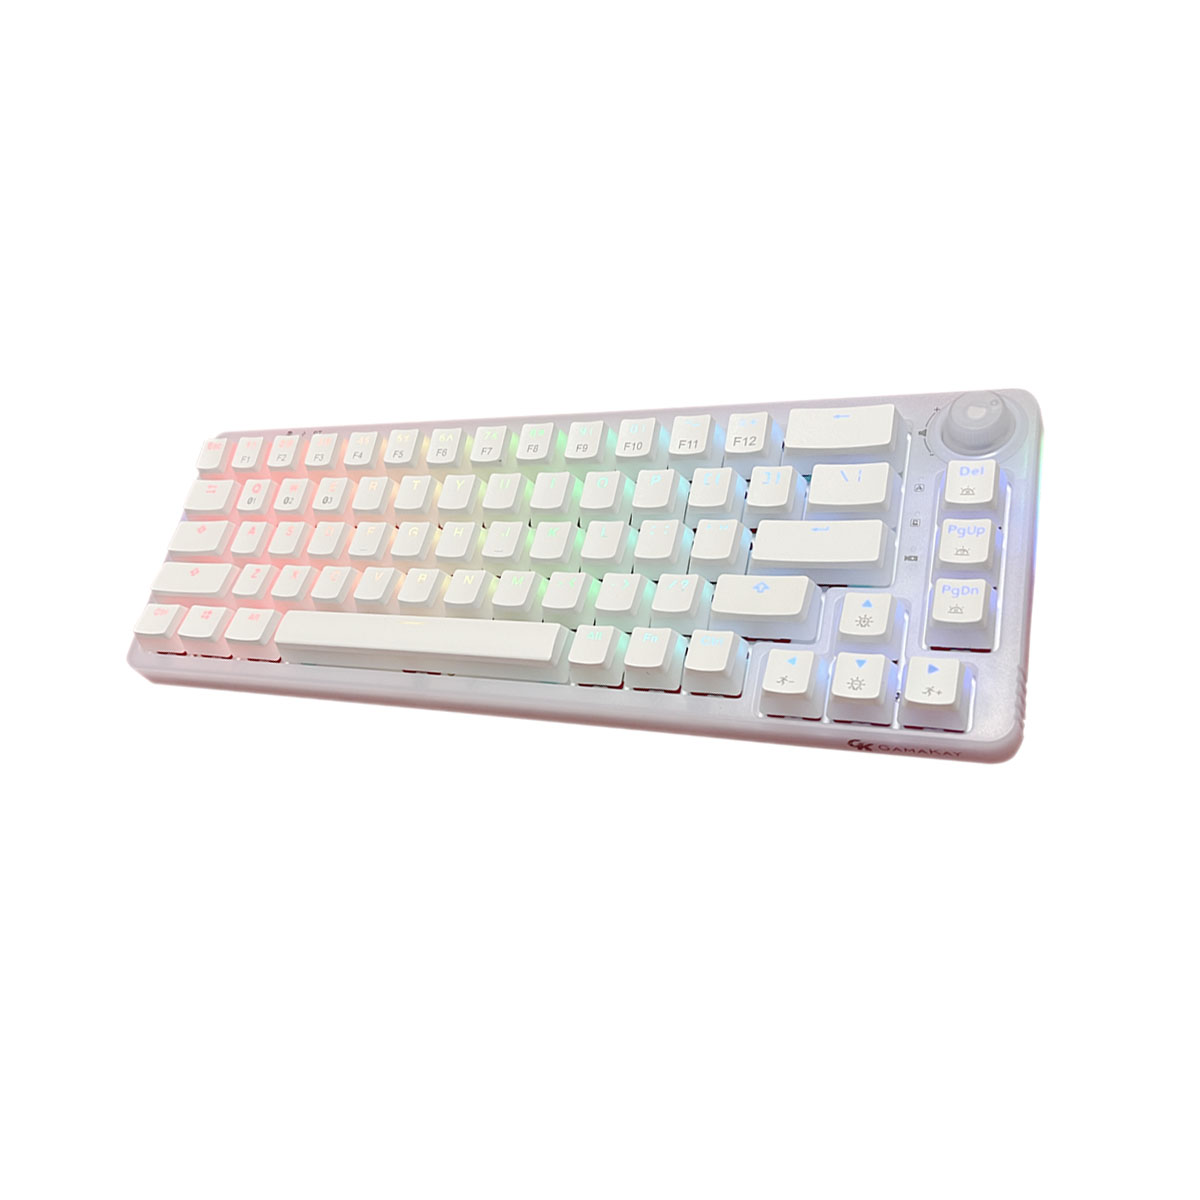 Find GAMAKAY LK67 Mechanical Keyboard 67 Keys Gamakay Customized Phenix/Crystal/Wasp Switch Hot Swapable Triple Mode Type C Wired bluetooth 2 4G Wireless OEM Profile Pudding Keycaps RGB Backlit Gaming Keyboard with Rotate Button Custom Keyboard for Sale on Gipsybee.com with cryptocurrencies